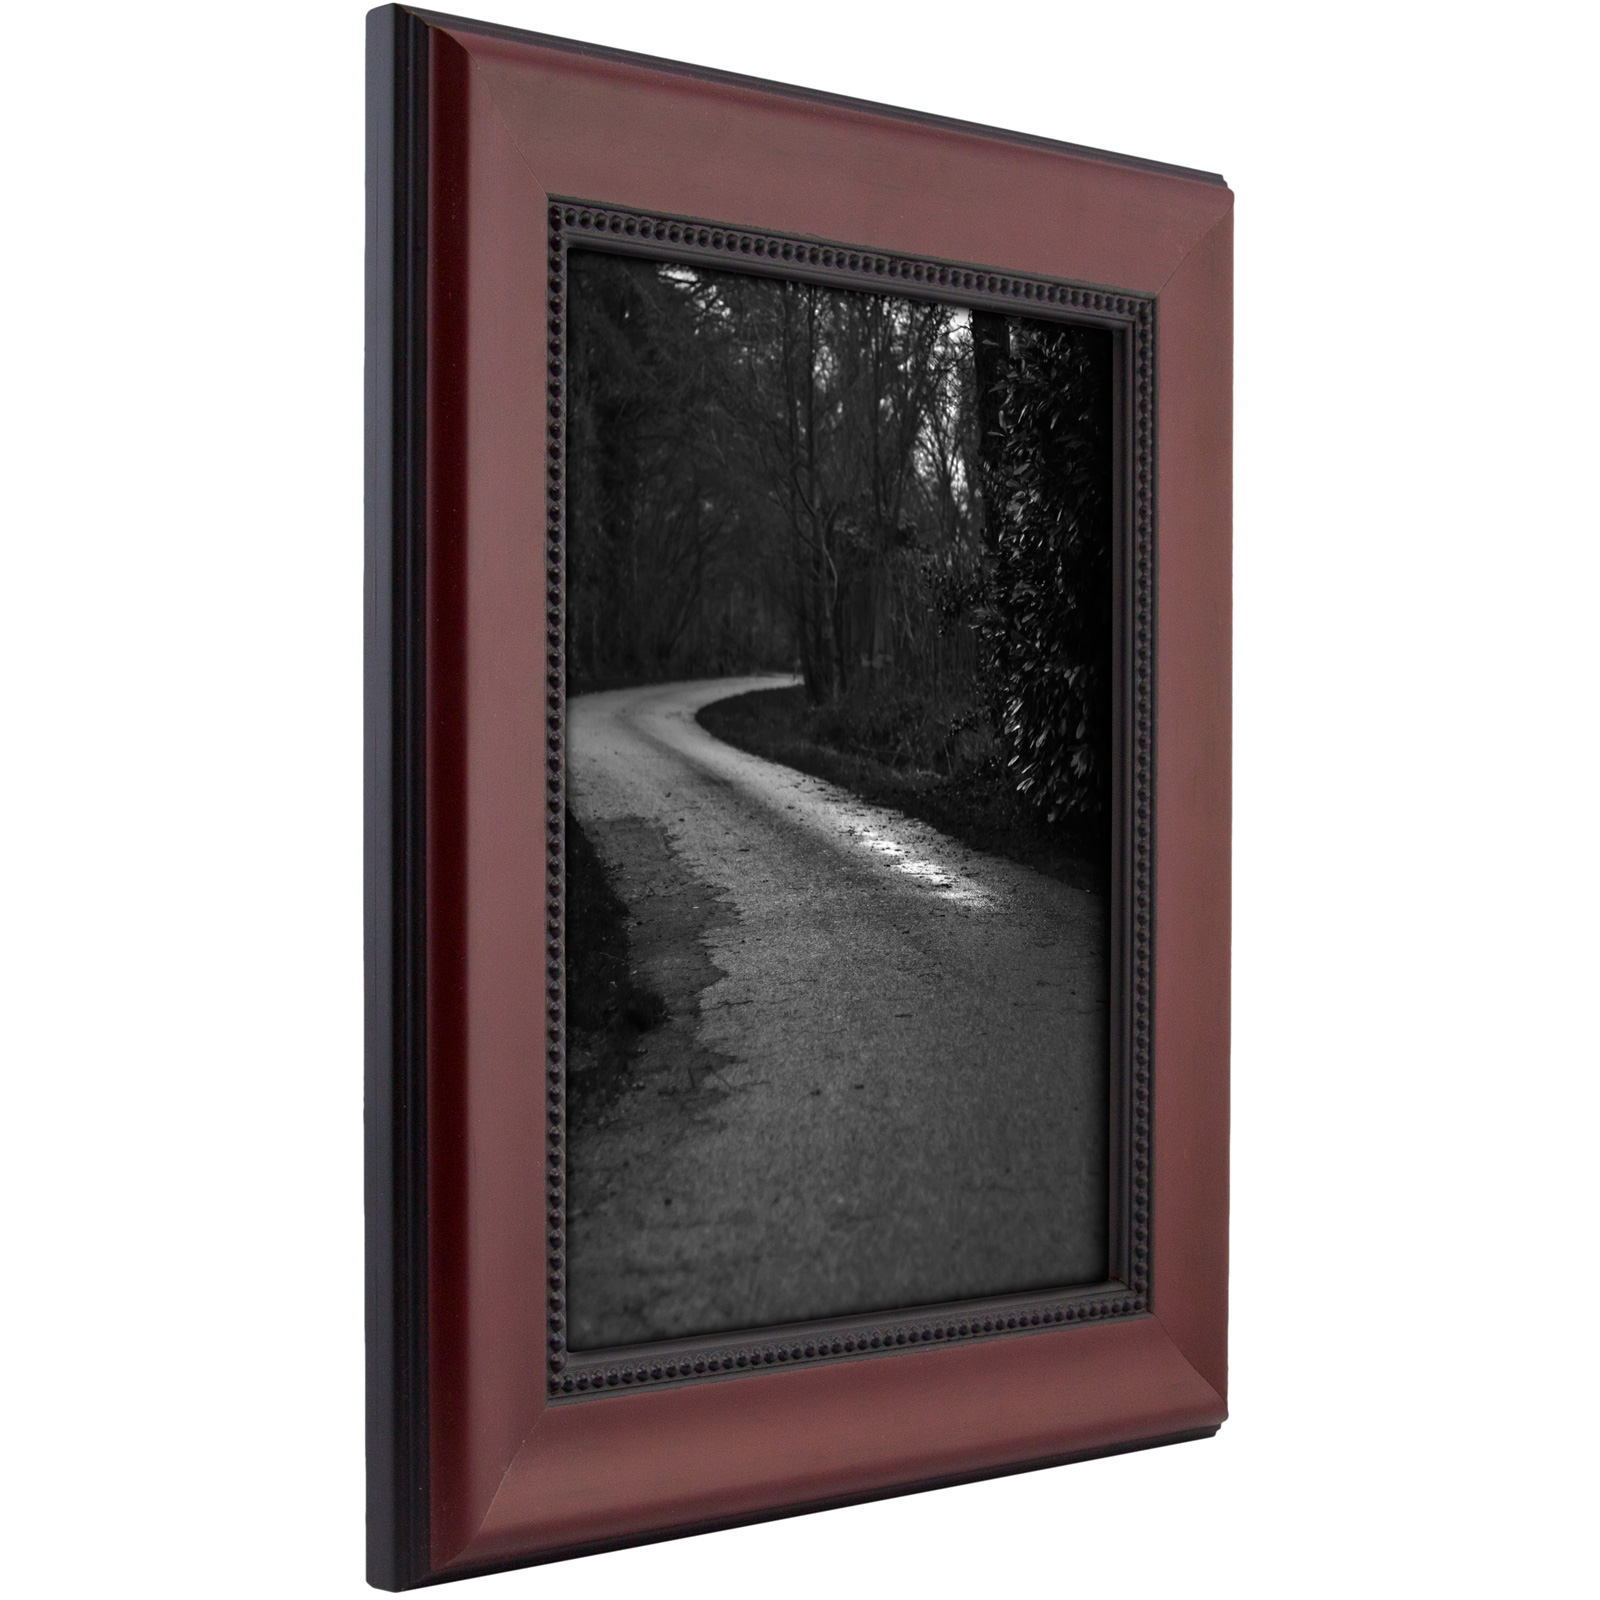 Craig Frames Inc Beaded Smooth Cherry Solid Wood Picture Frame (9405)